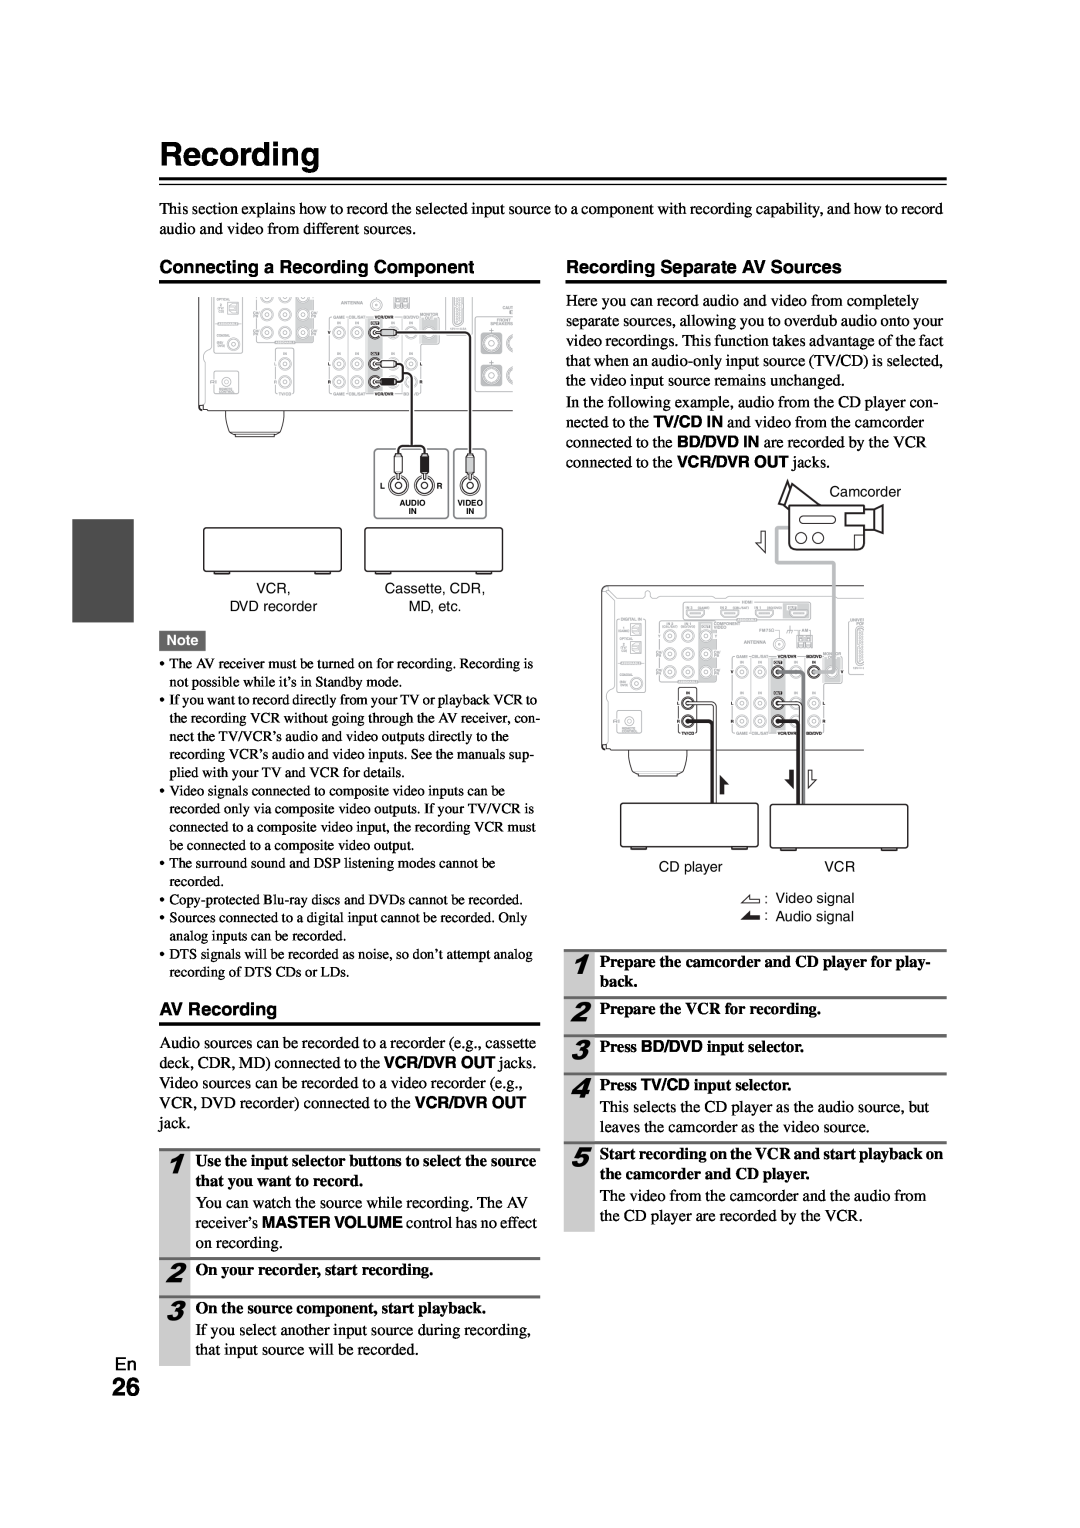 Onkyo HT-S3300 instruction manual Connecting a Recording Component, AV Recording, Recording Separate AV Sources 